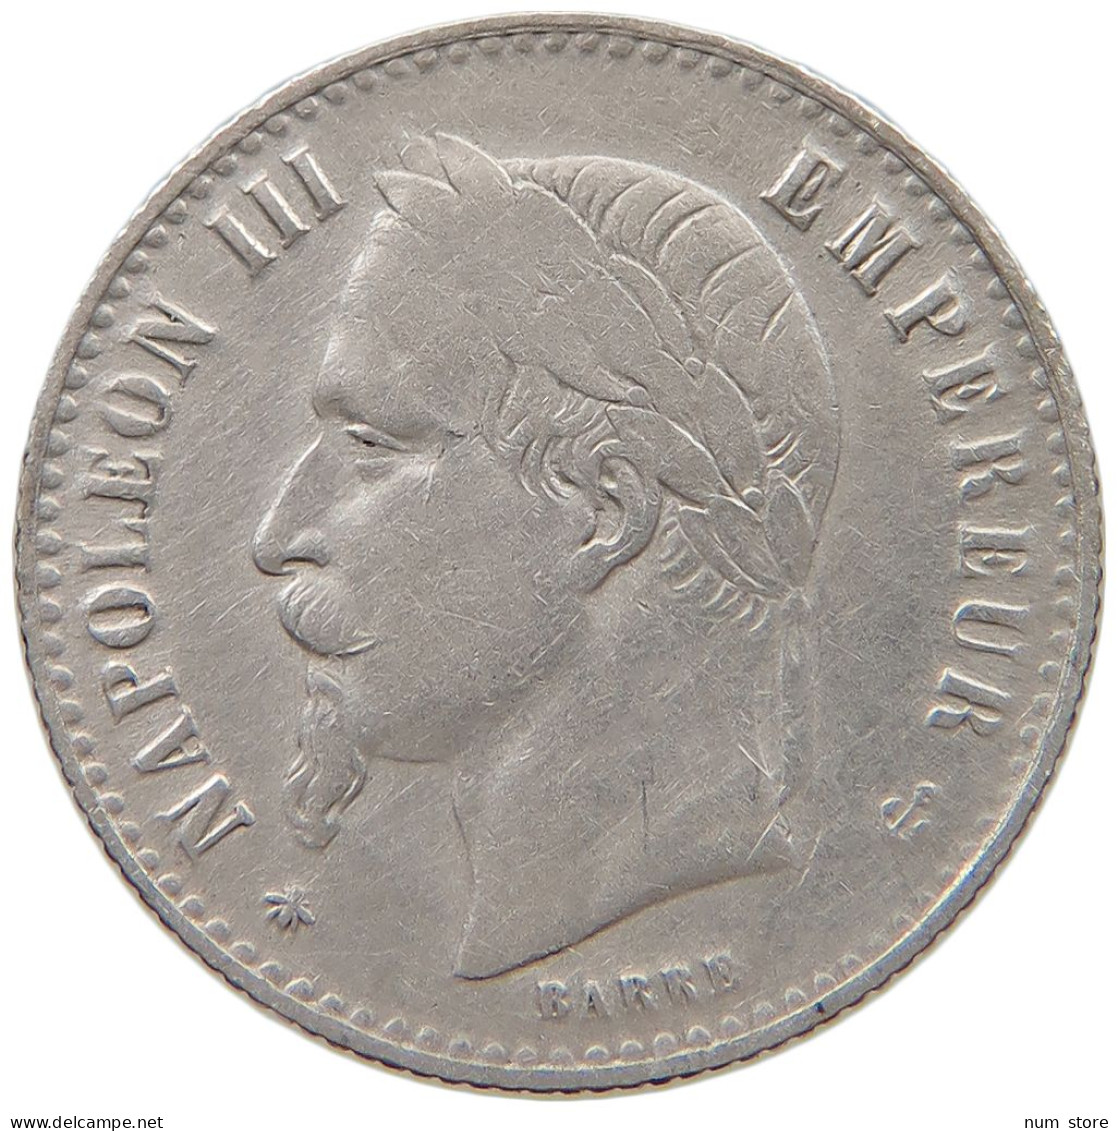 FRANCE 50 CENTIMES 1867 A Napoleon III. (1852-1870) #t157 0711 - 50 Centimes